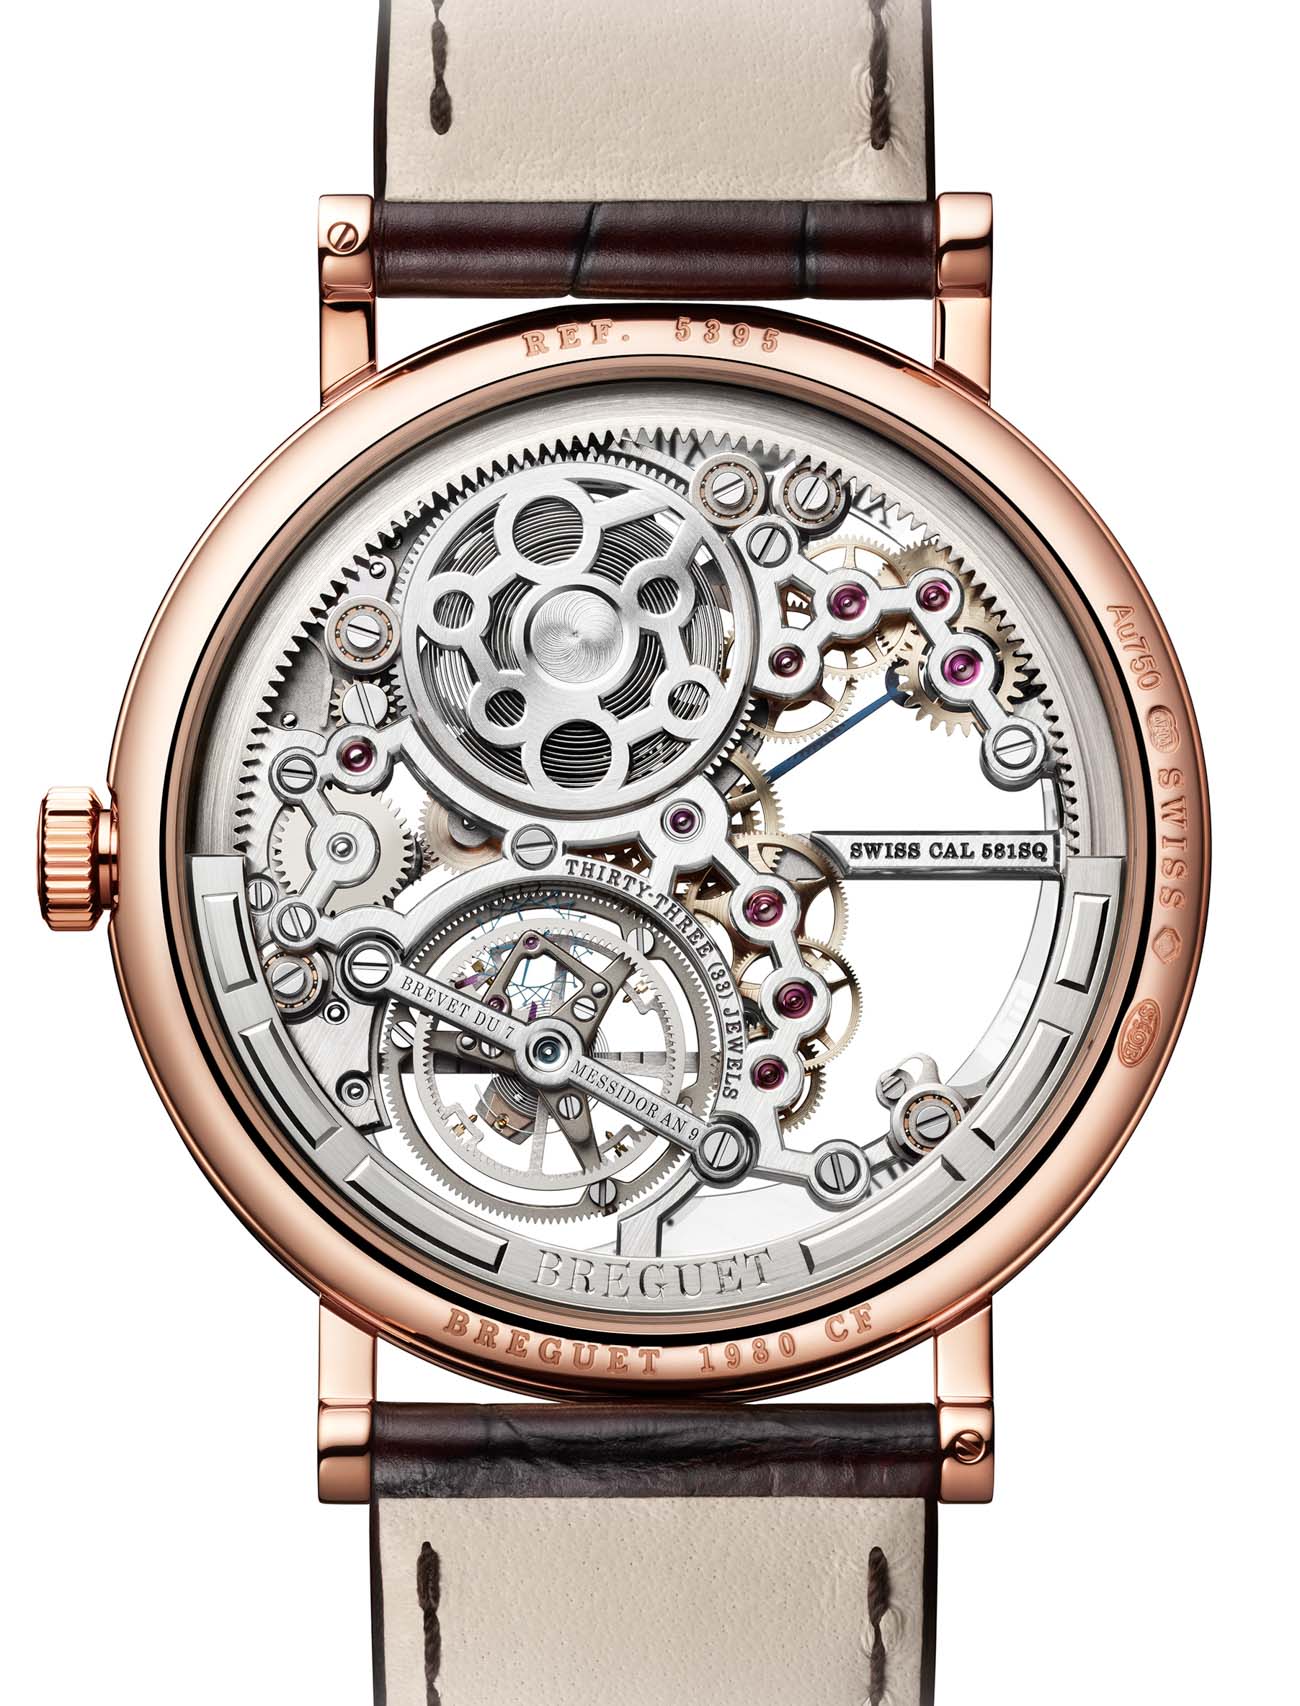 Breguet Classique Tourbillon Extra-Plat Squelette 5395 Watch Is Technical, Artistic, And Thin Watch Releases 